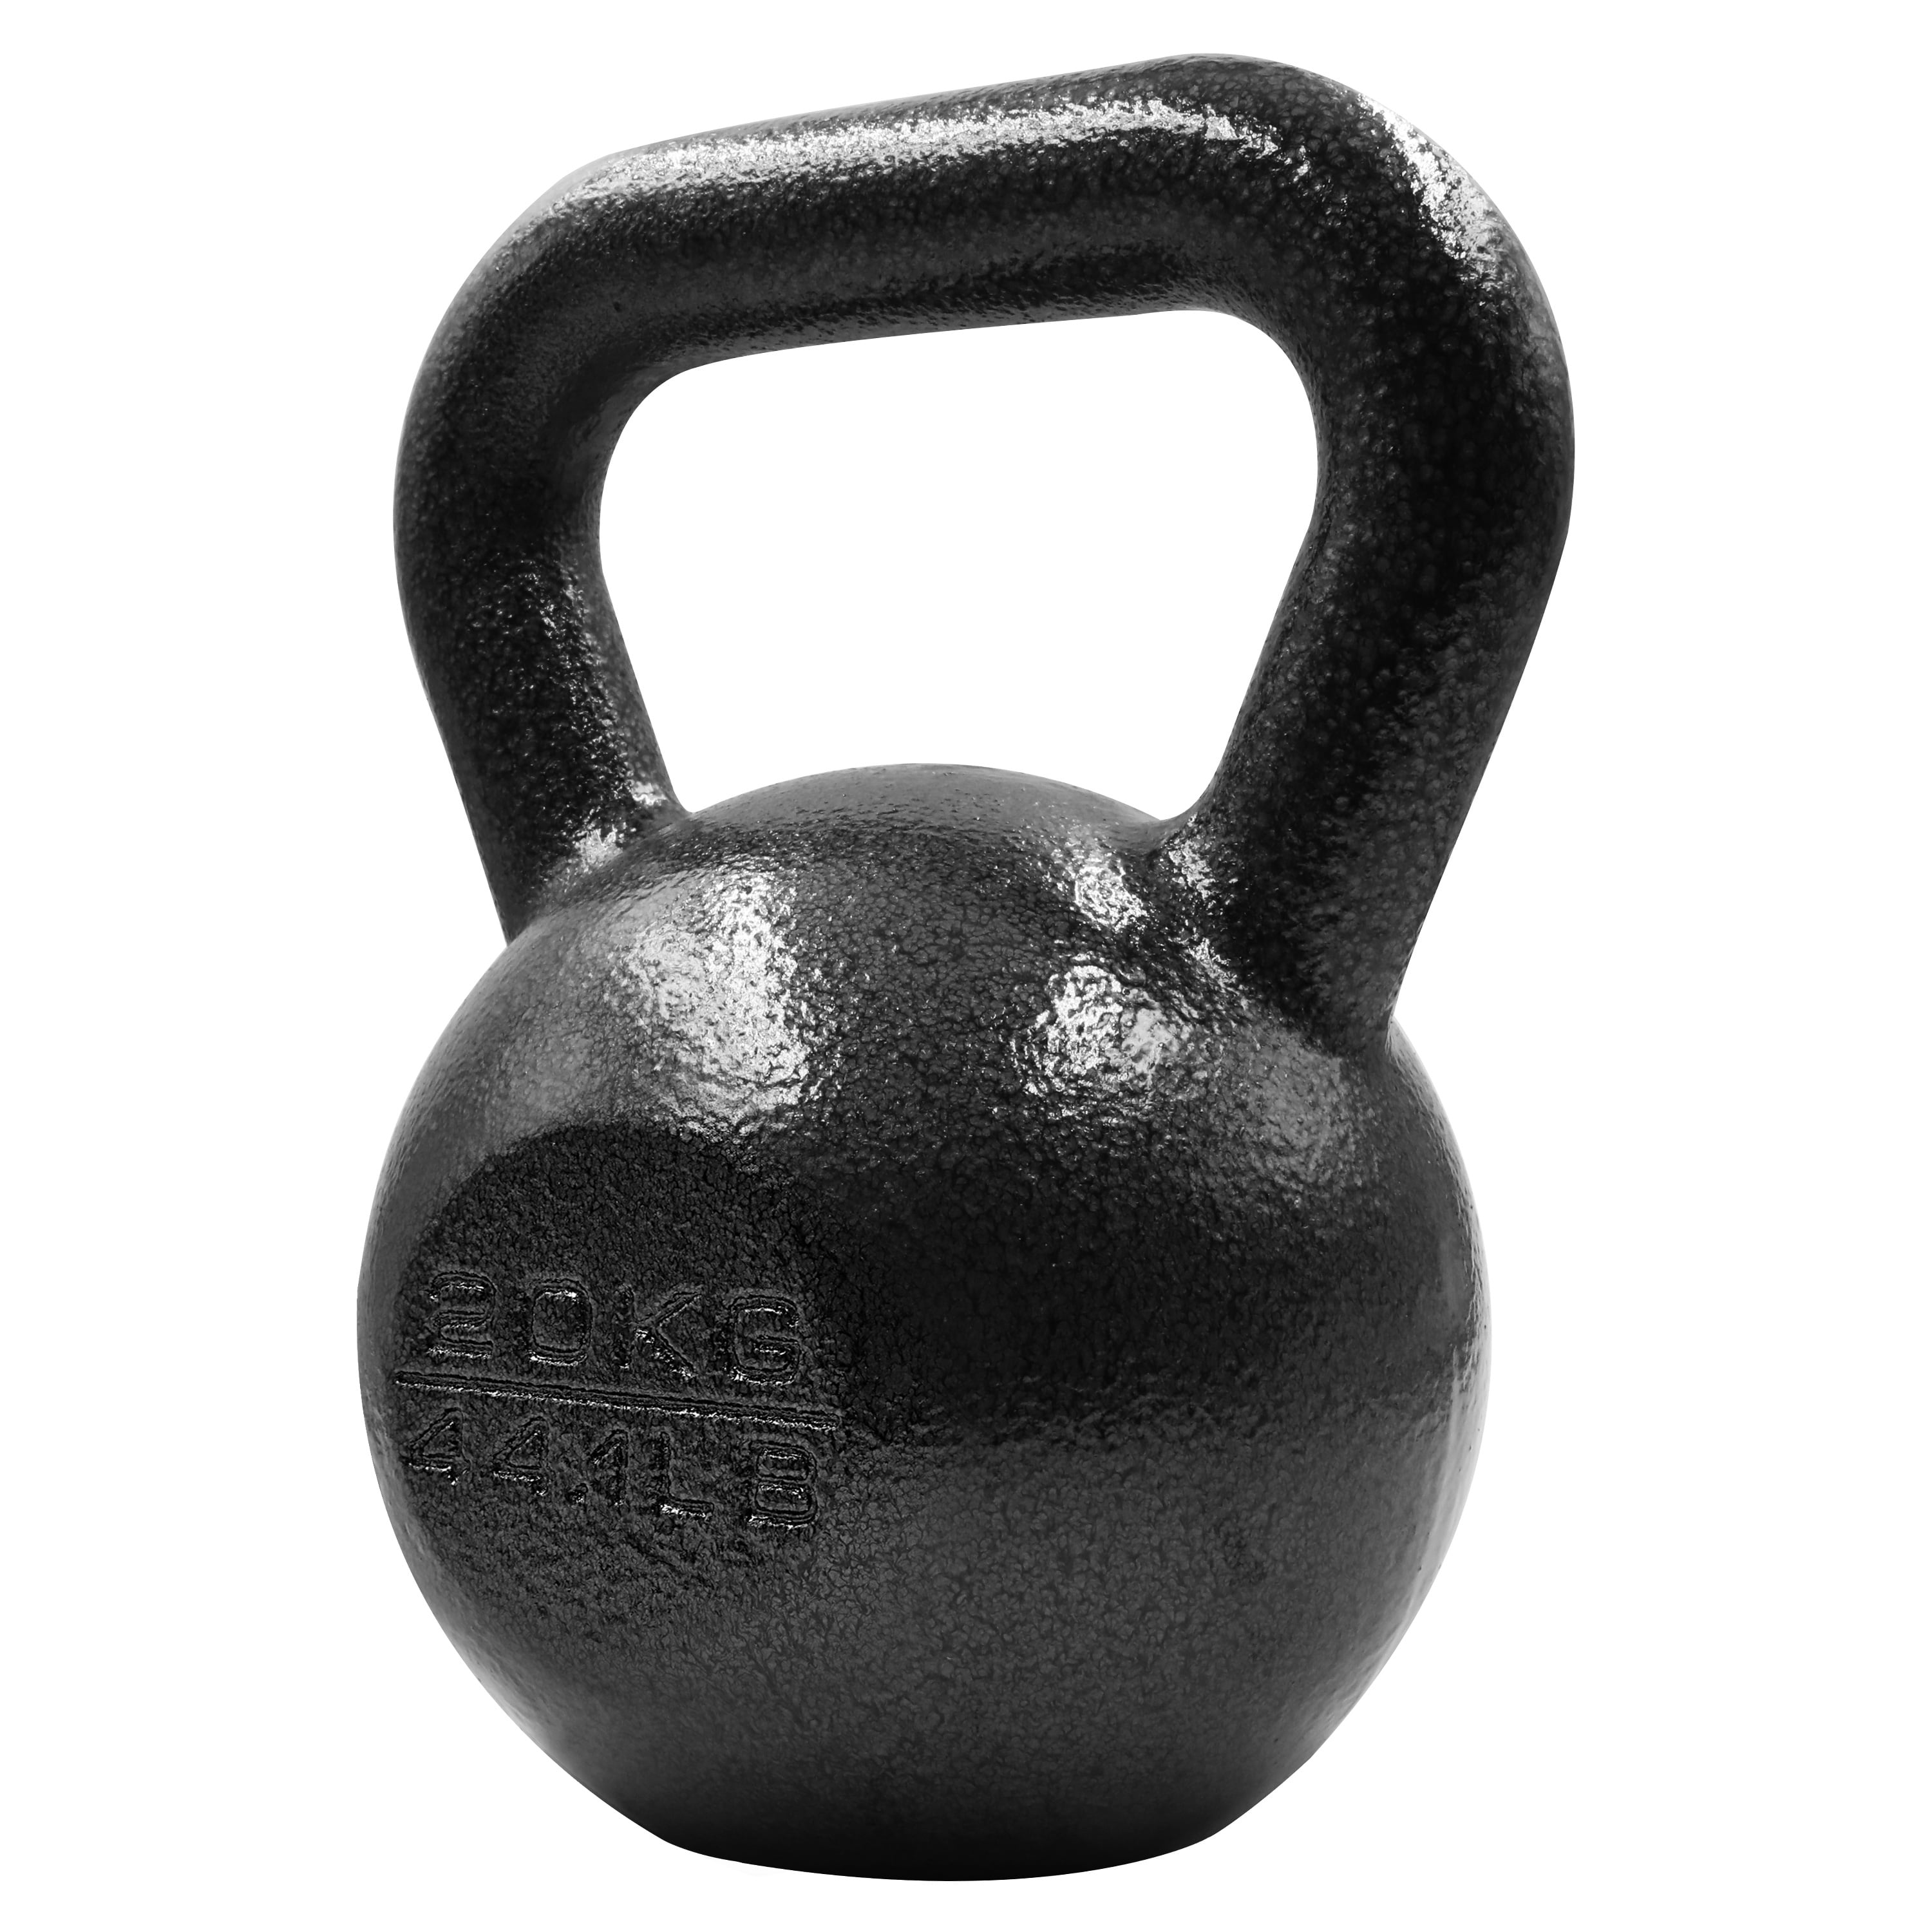 SPORTS CAST IRON KETTLEBELLS WITH RUBBER SLEEVE HOME GYM FITNESS KETTLEBELL 8kg 